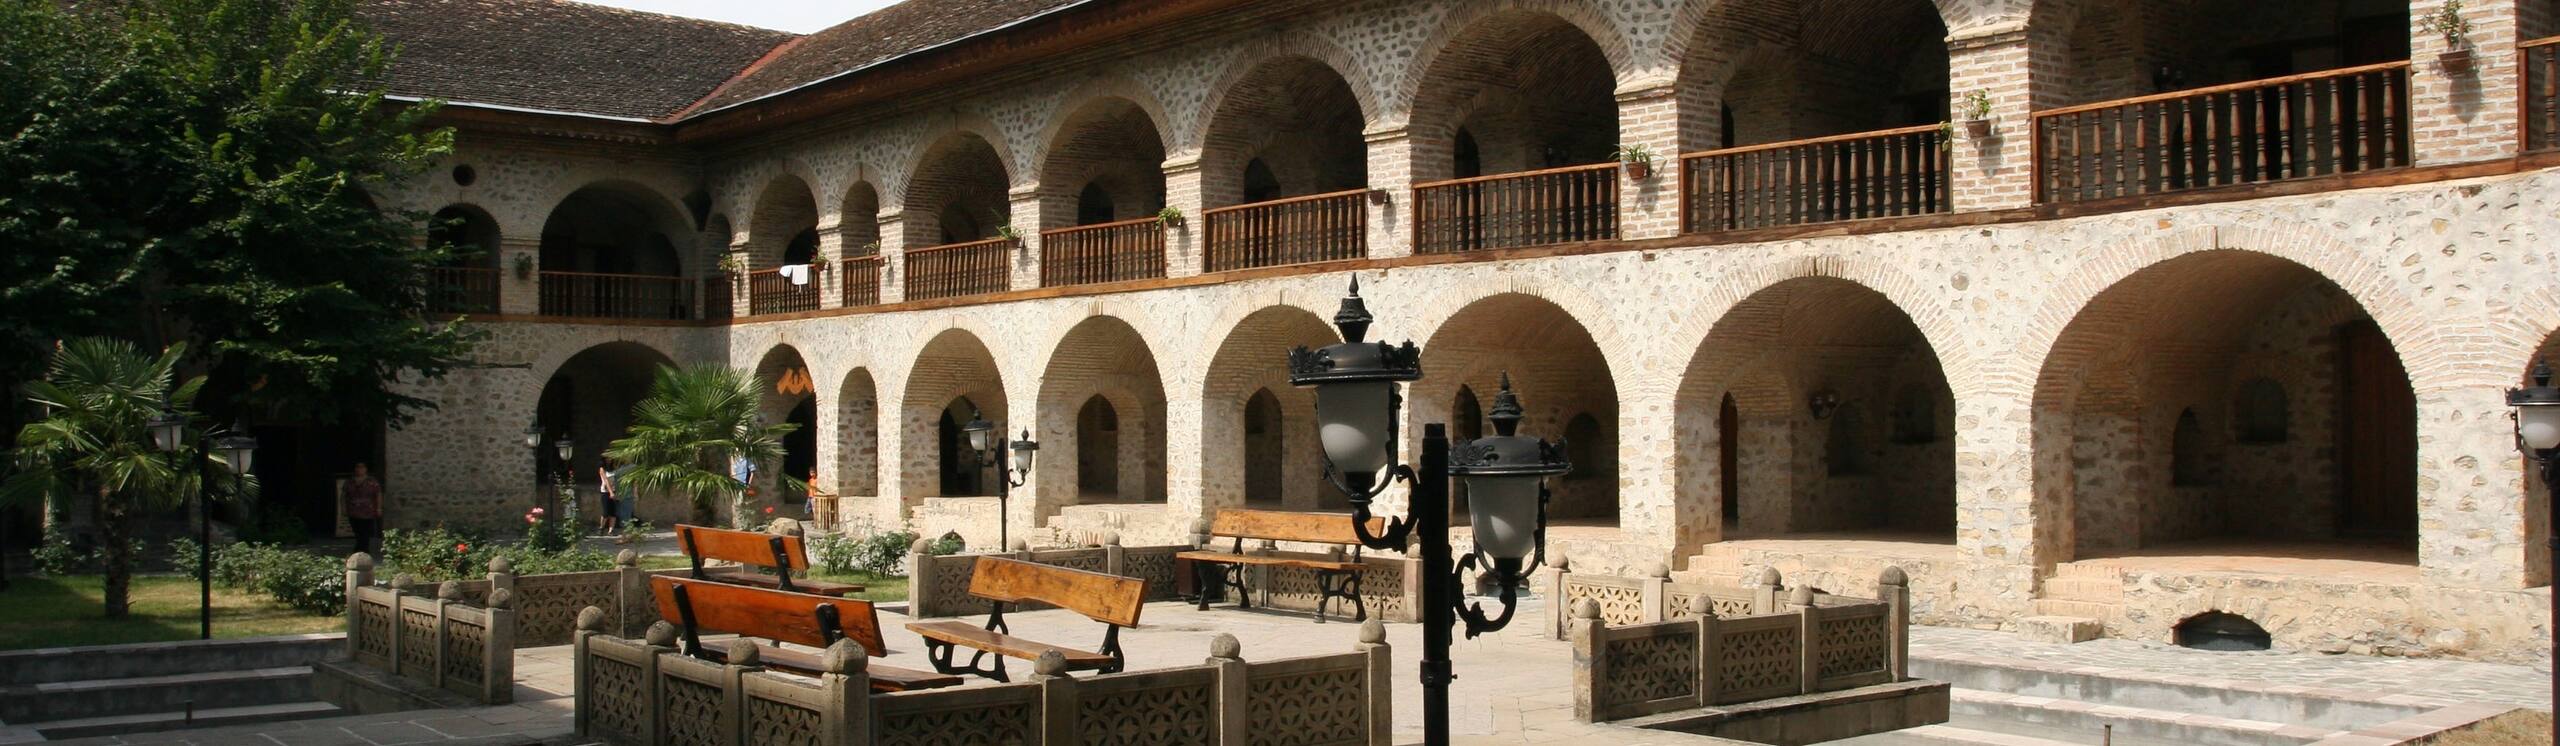 Historic Centre of Sheki with the Khan’s Palace